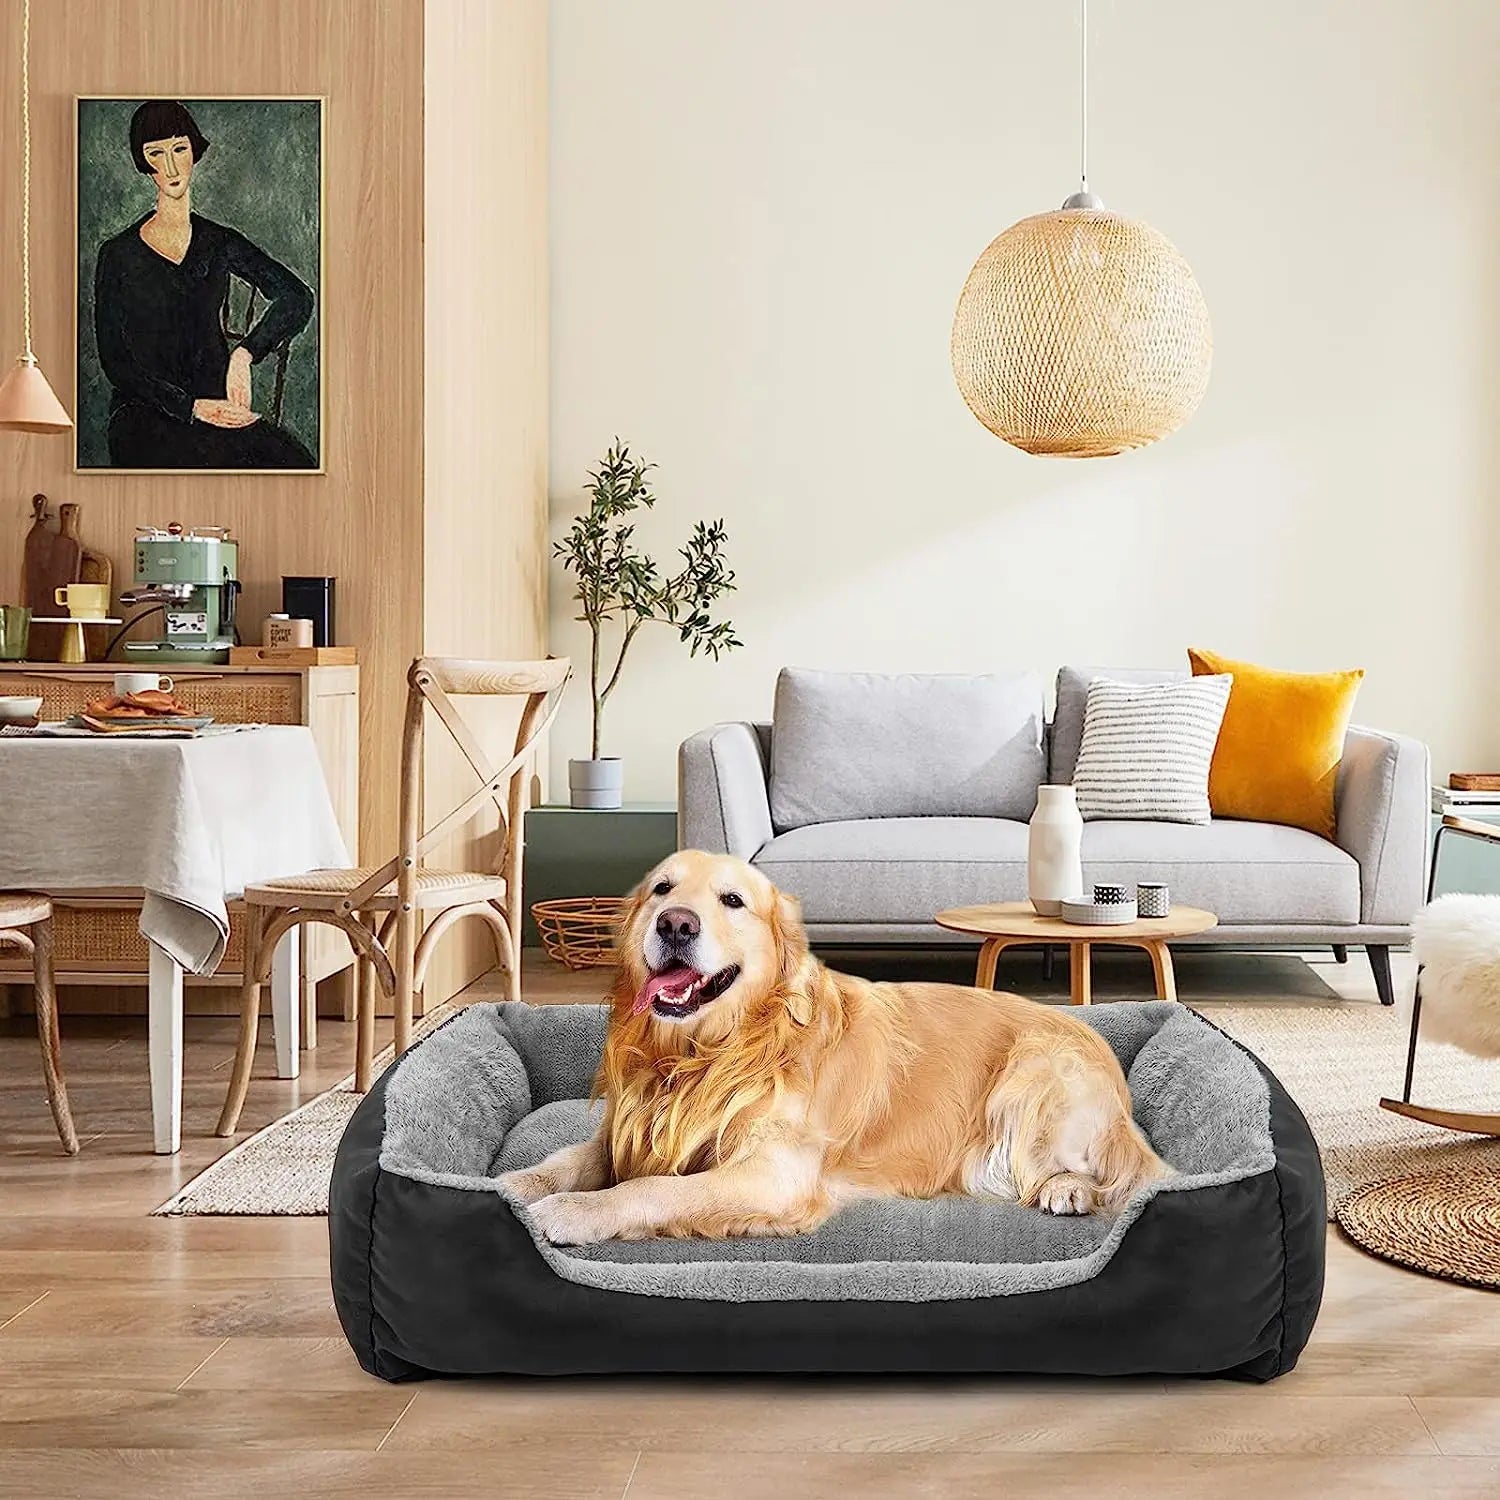 Introducing ATUBAN's large dog beds! Washable and comfortable, these rectangular mattresses provide warmth for medium to large dogs and cats.